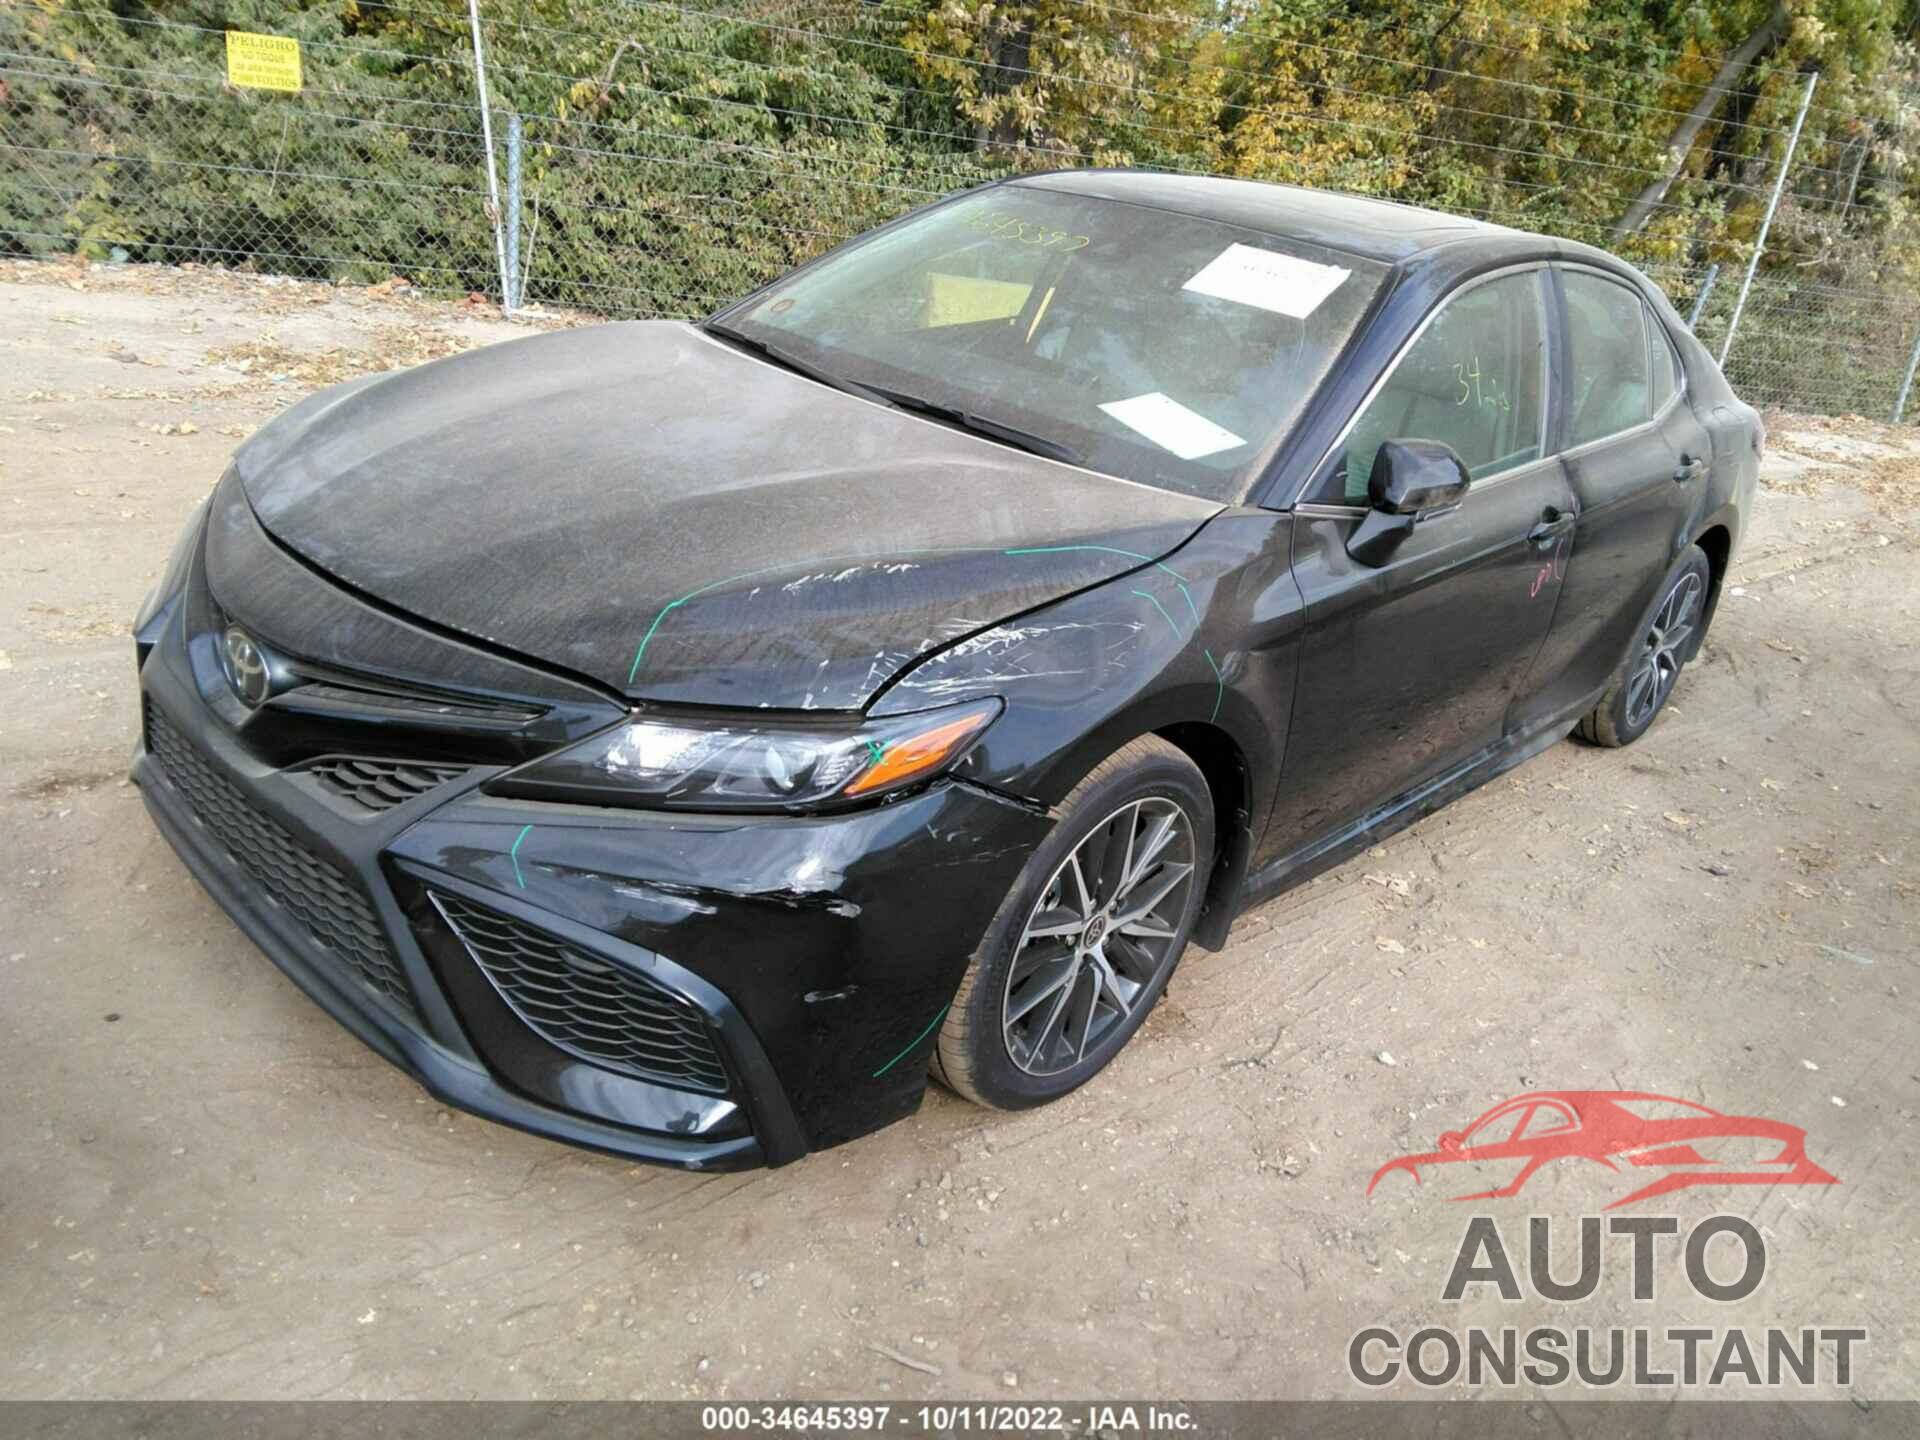 TOYOTA CAMRY 2022 - 4T1T11BK3NU072093